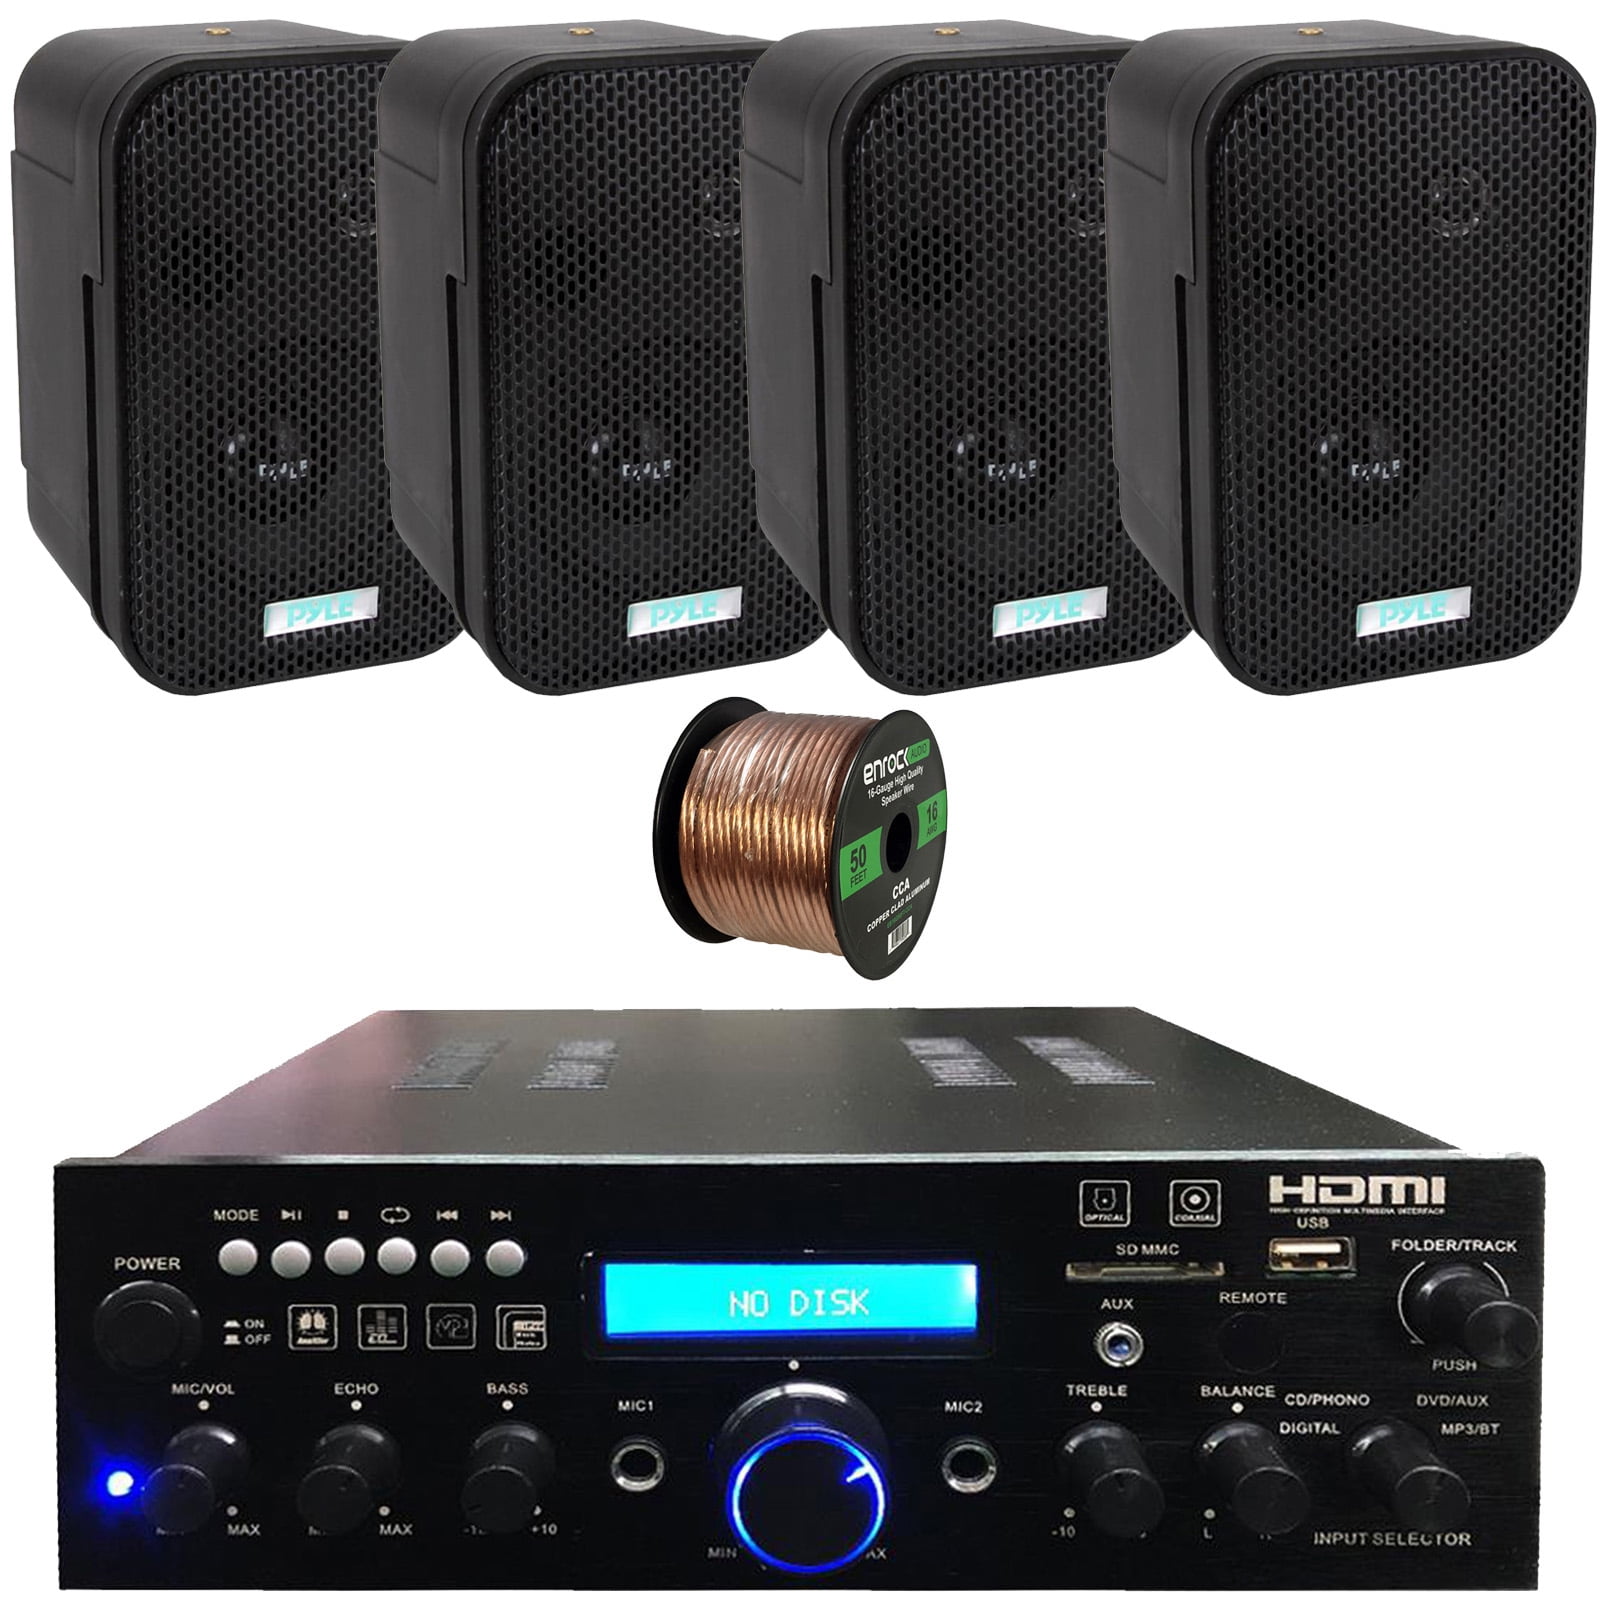 Black Wireless Bluetooth Power Amplifier System 300W 4 Channel Home Theater Audio Stereo Sound Receiver Box Entertainment w/USB Black & Dual Waterproof Outdoor Speaker System RCA 